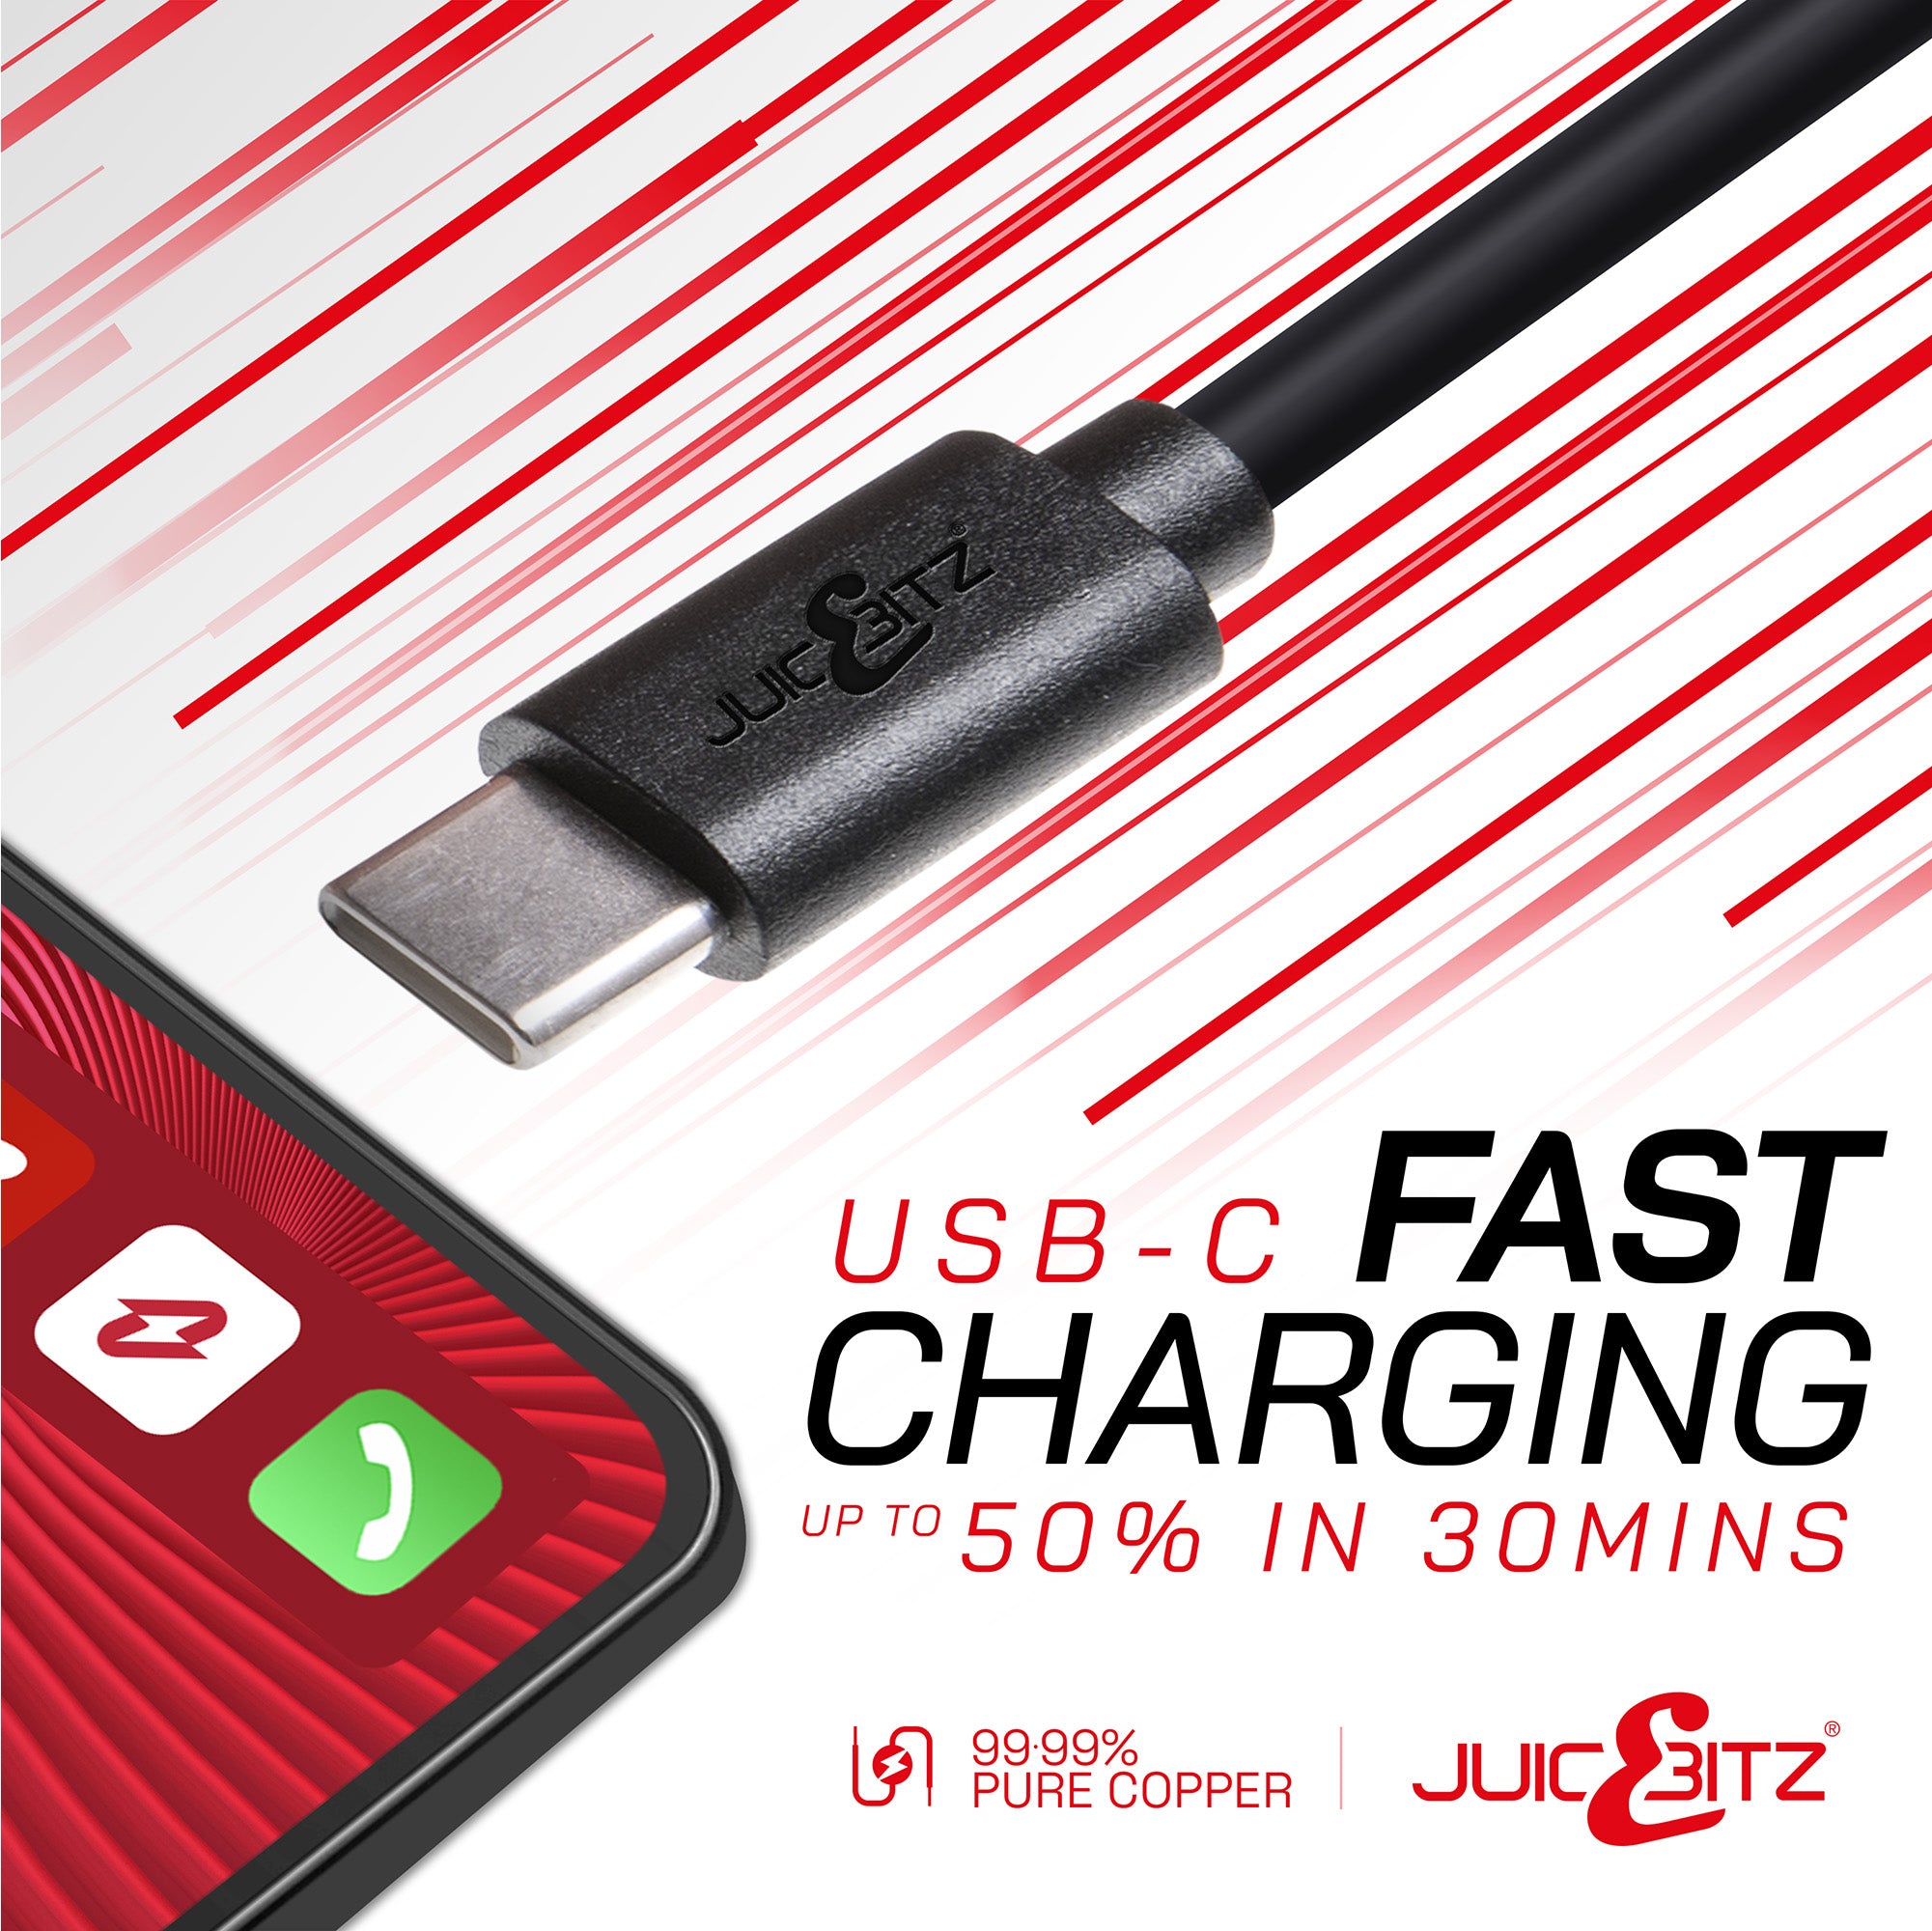 USB 2.0 Male to USB-C 3A Fast Charger Data Cable - Black